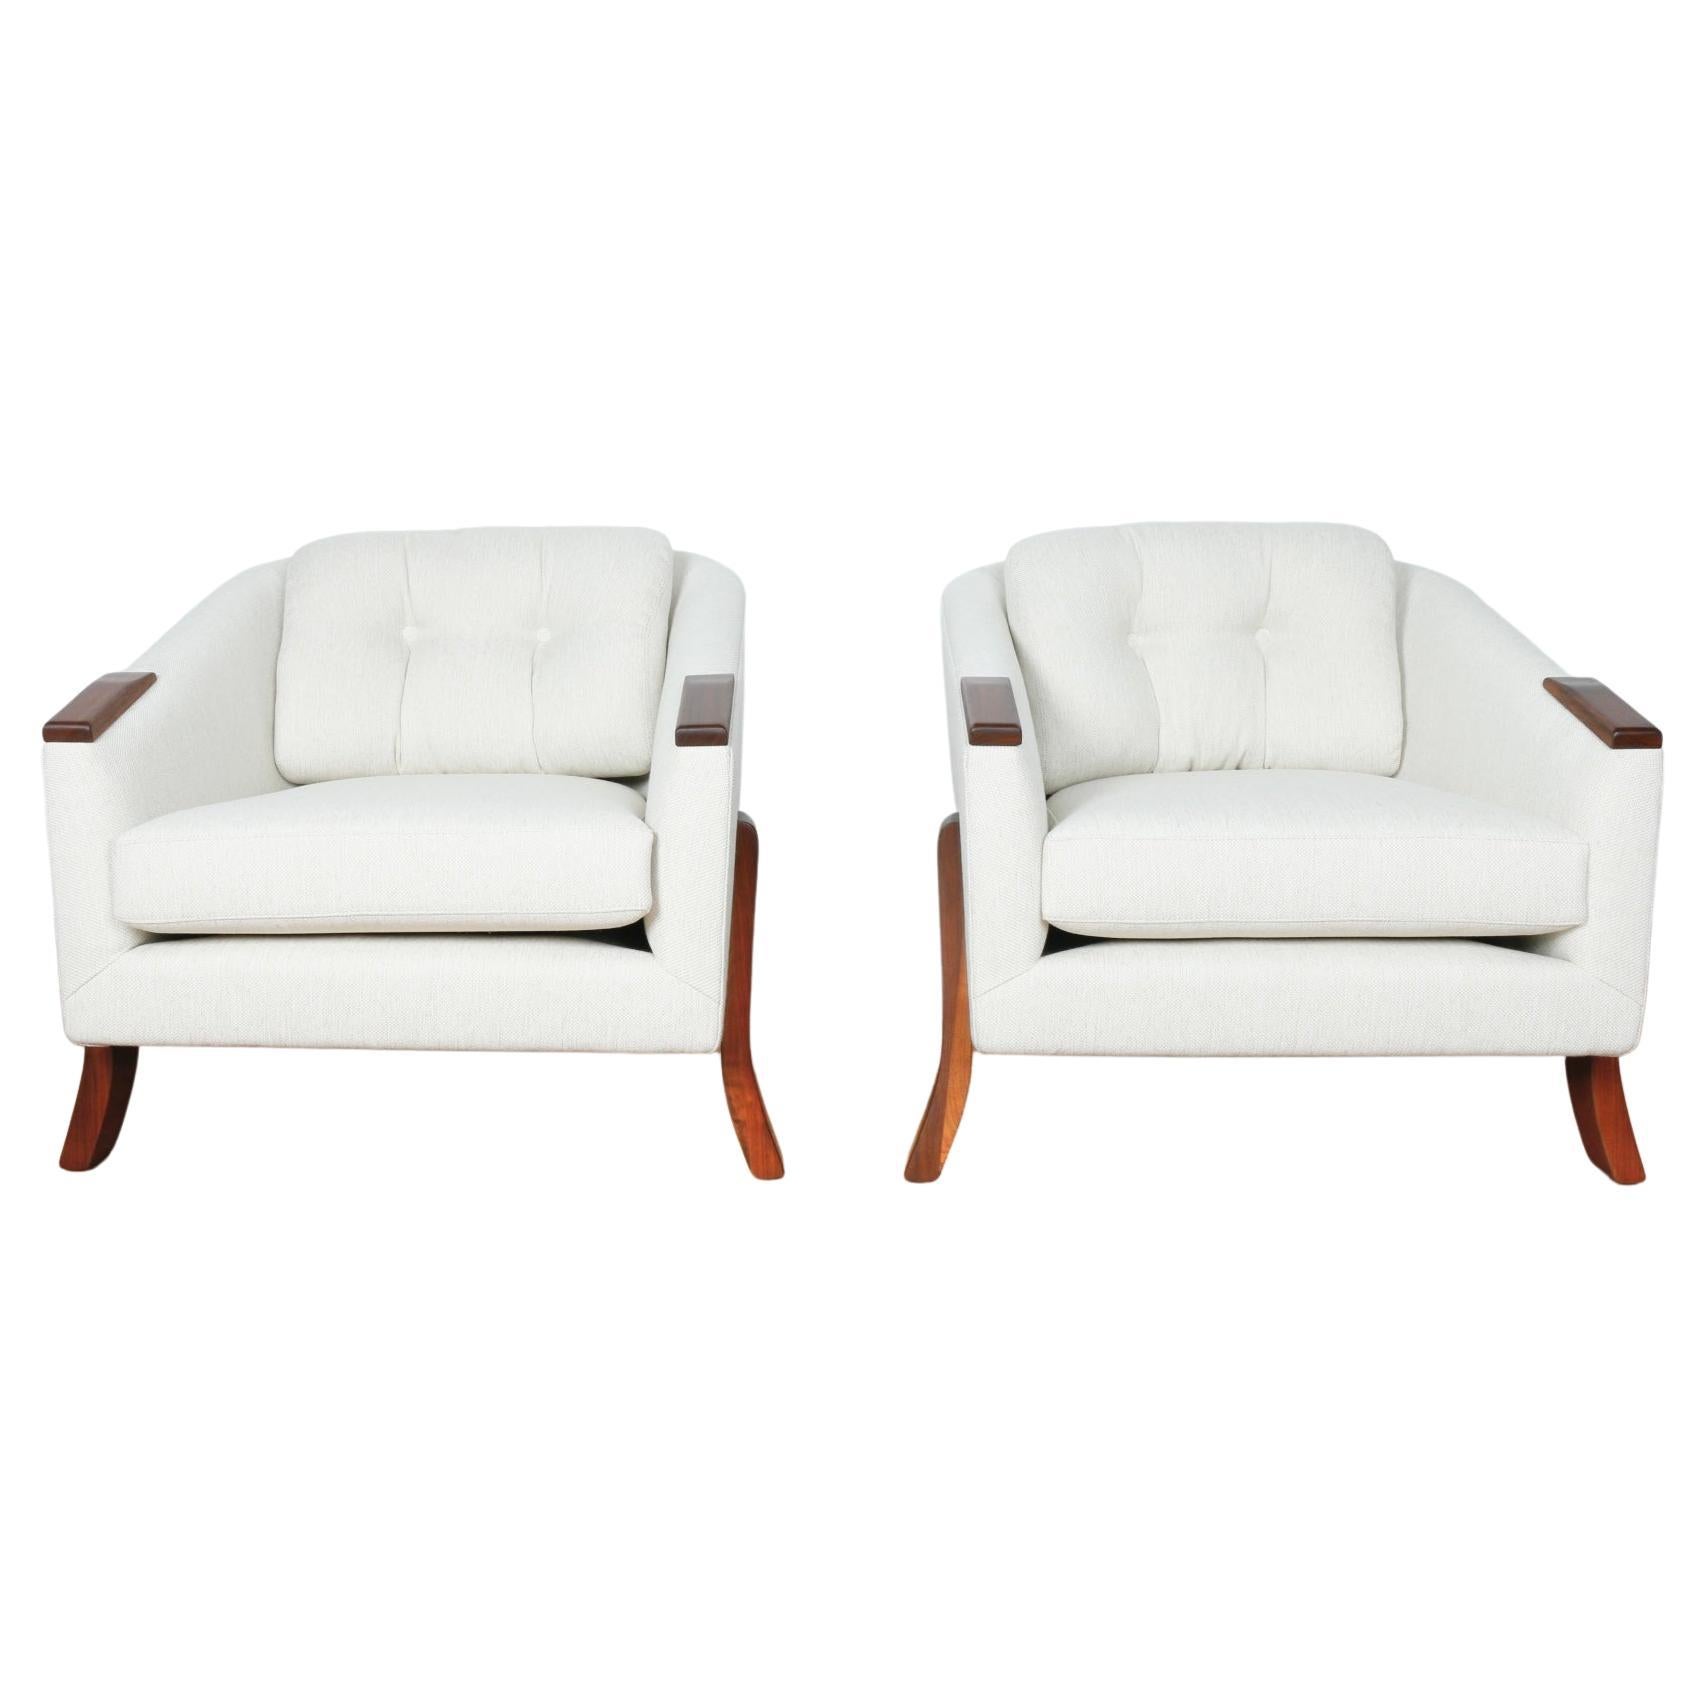 Adrian Pearsall Attributed Pair of Lounge Chairs For Sale